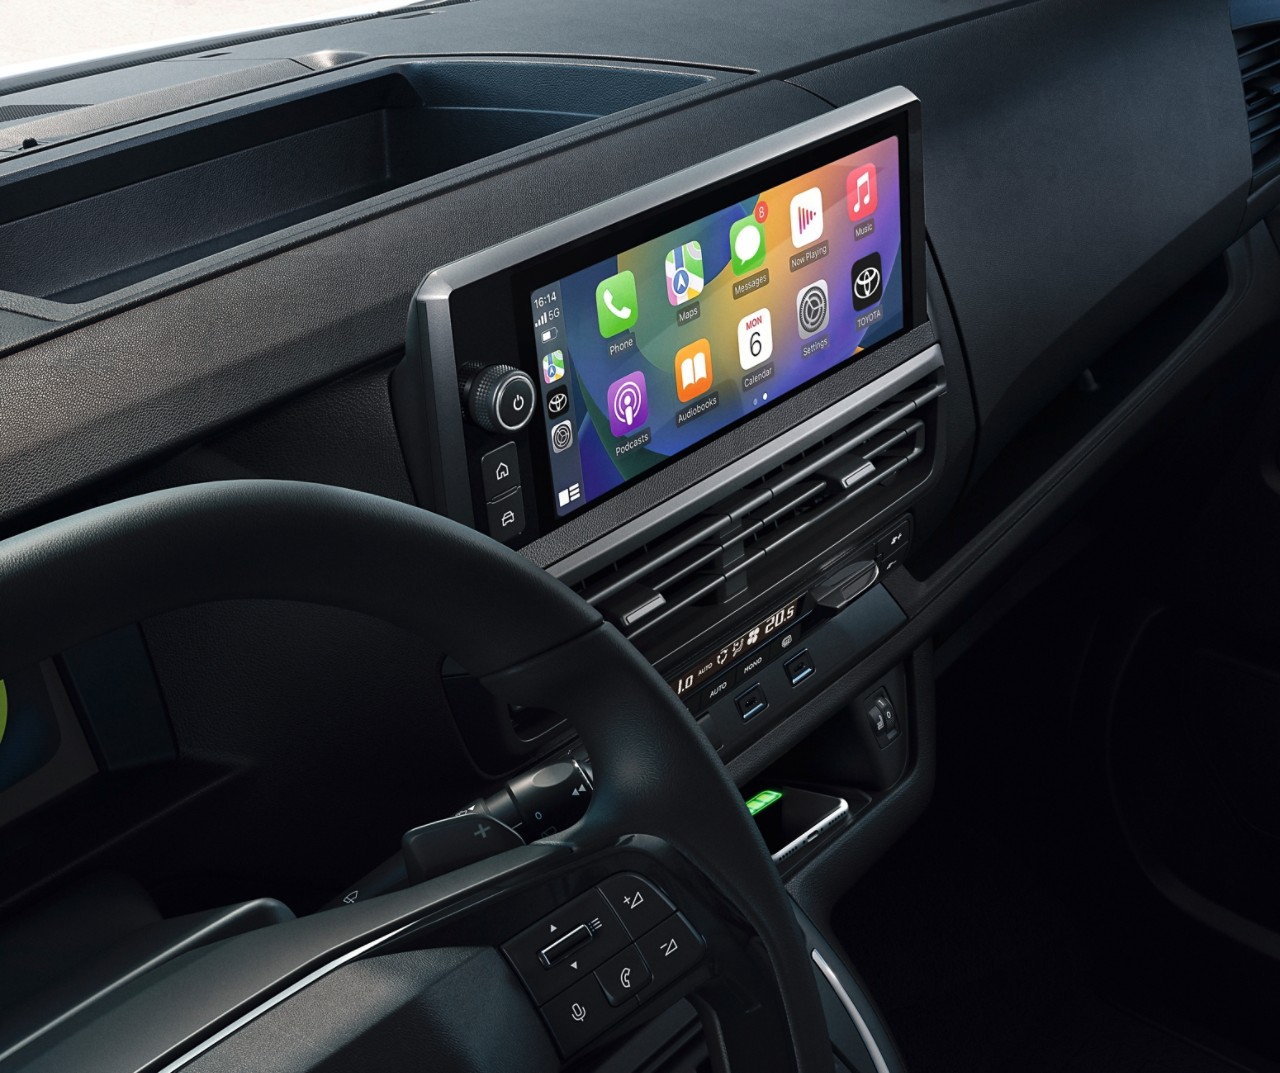 The 10-inch multimedia touchscreen 